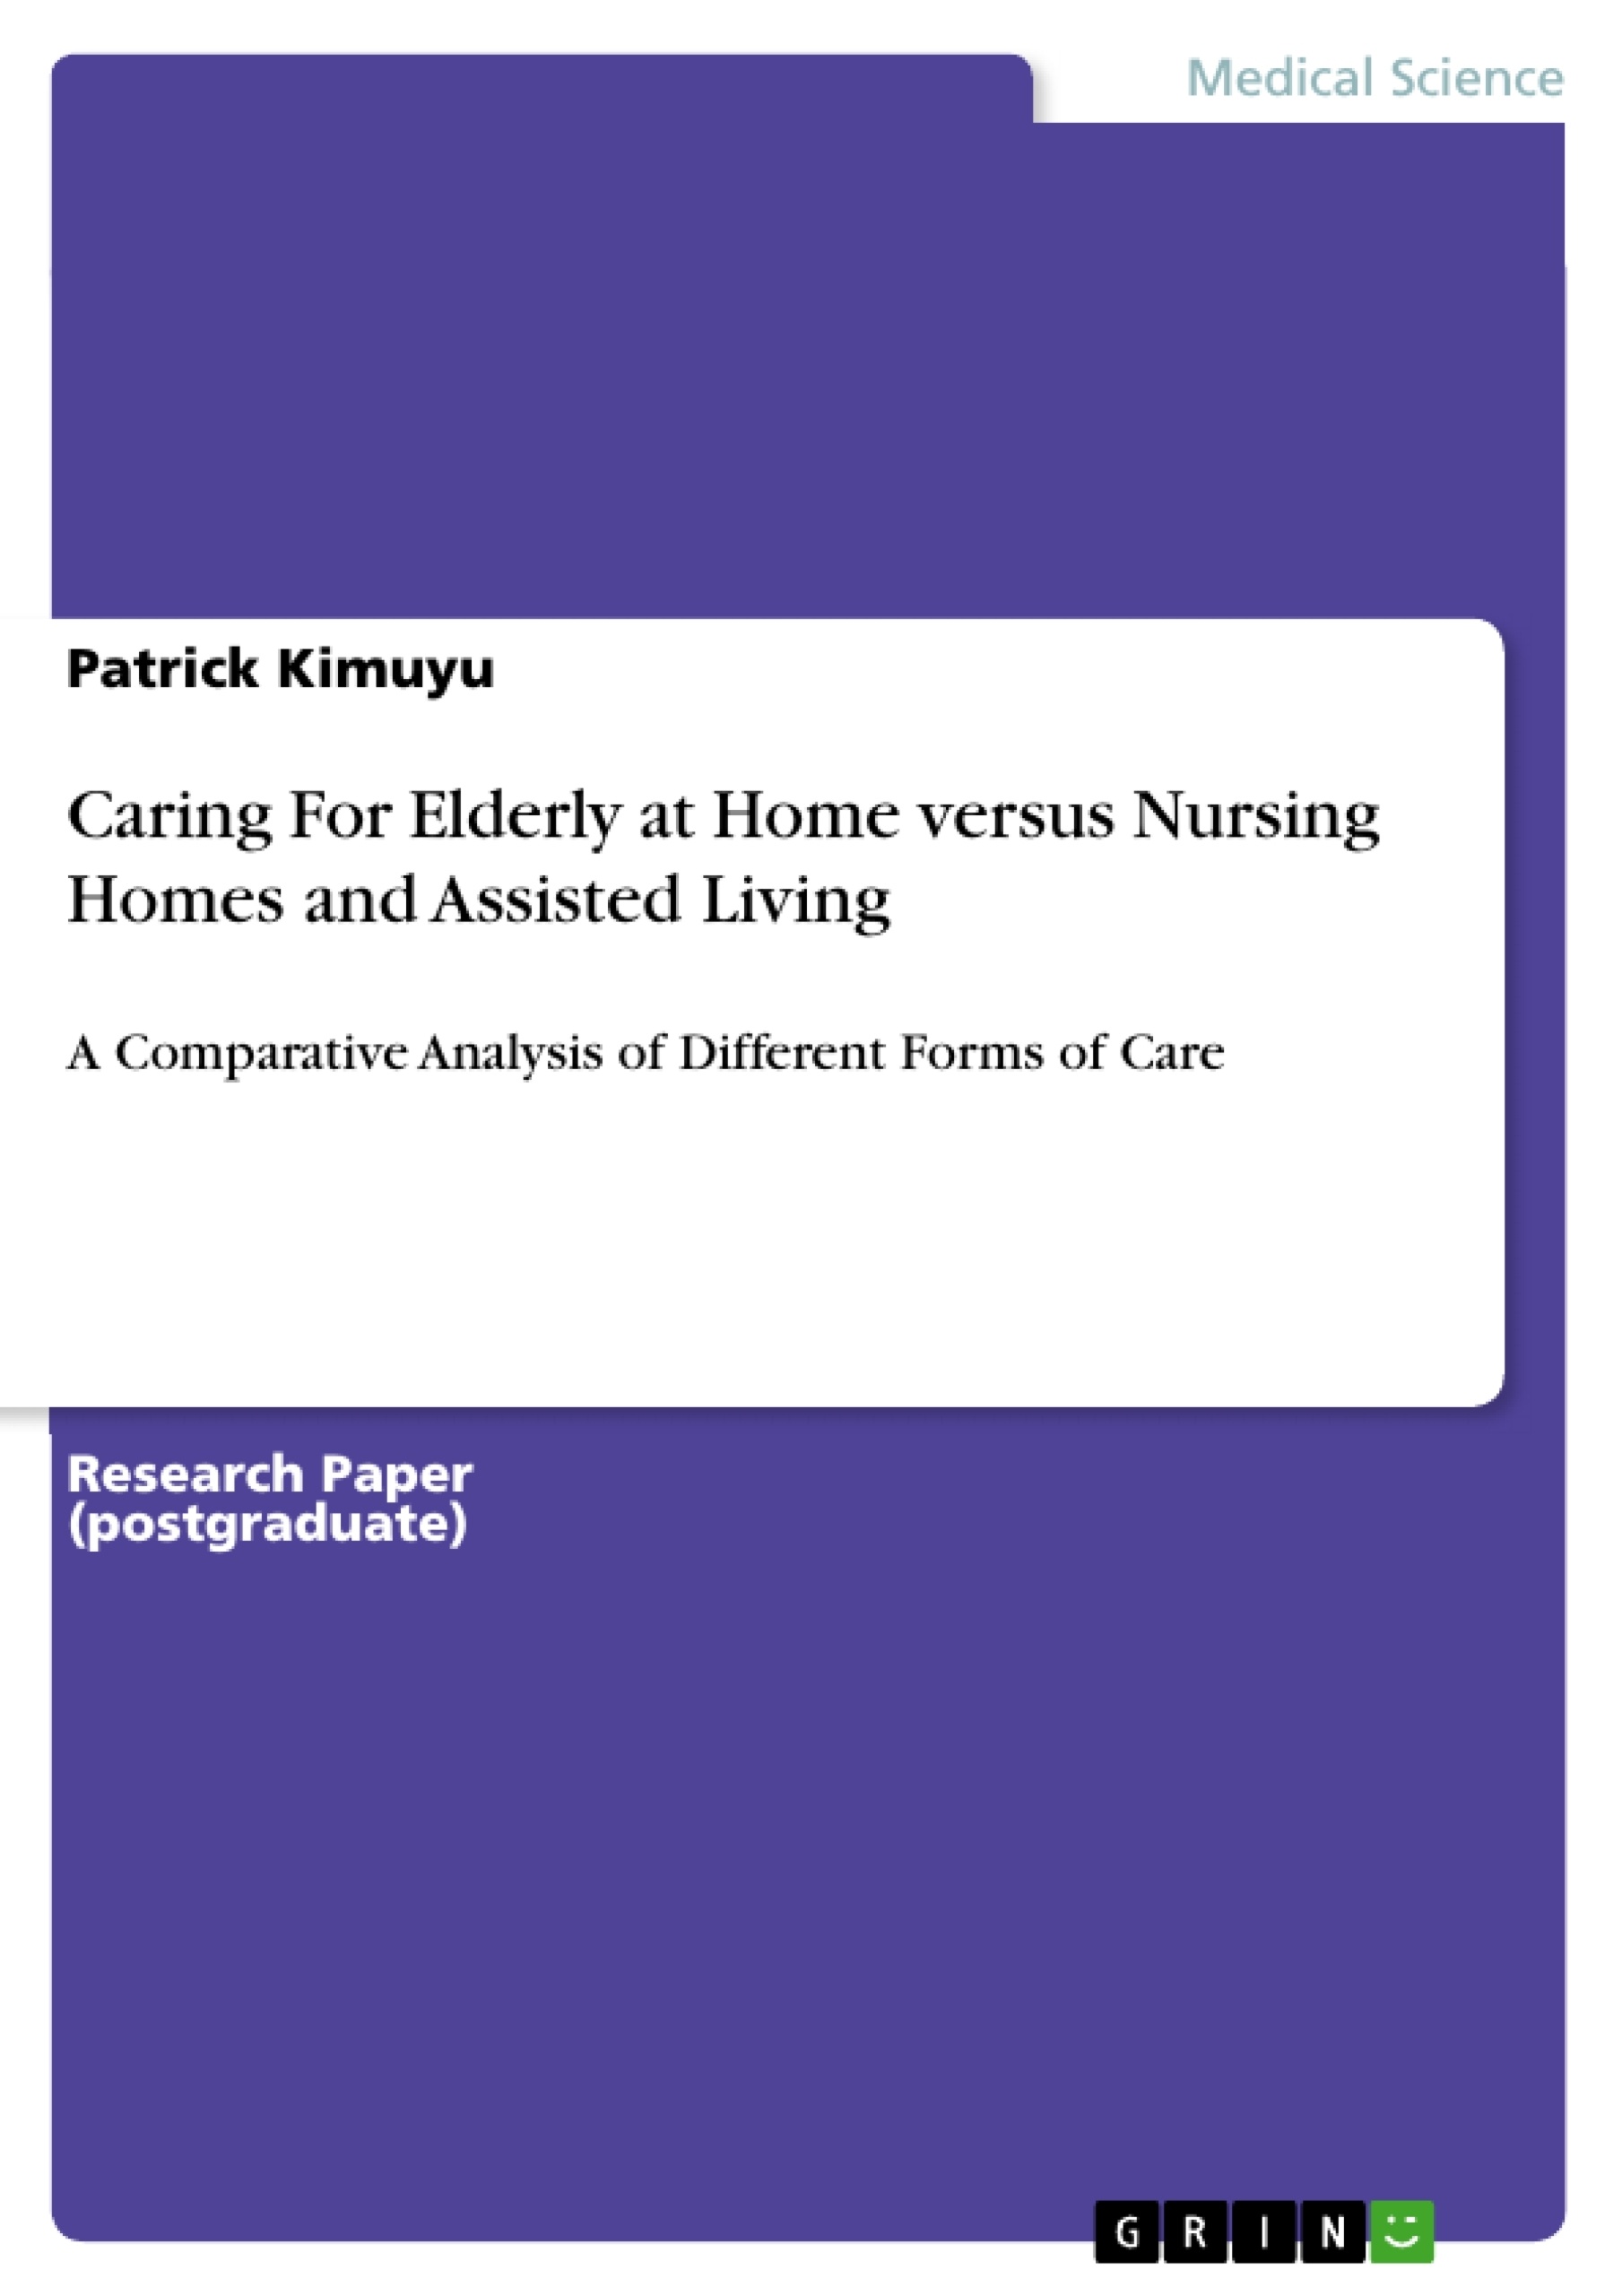 Titel: Caring For Elderly at Home versus Nursing Homes and Assisted Living